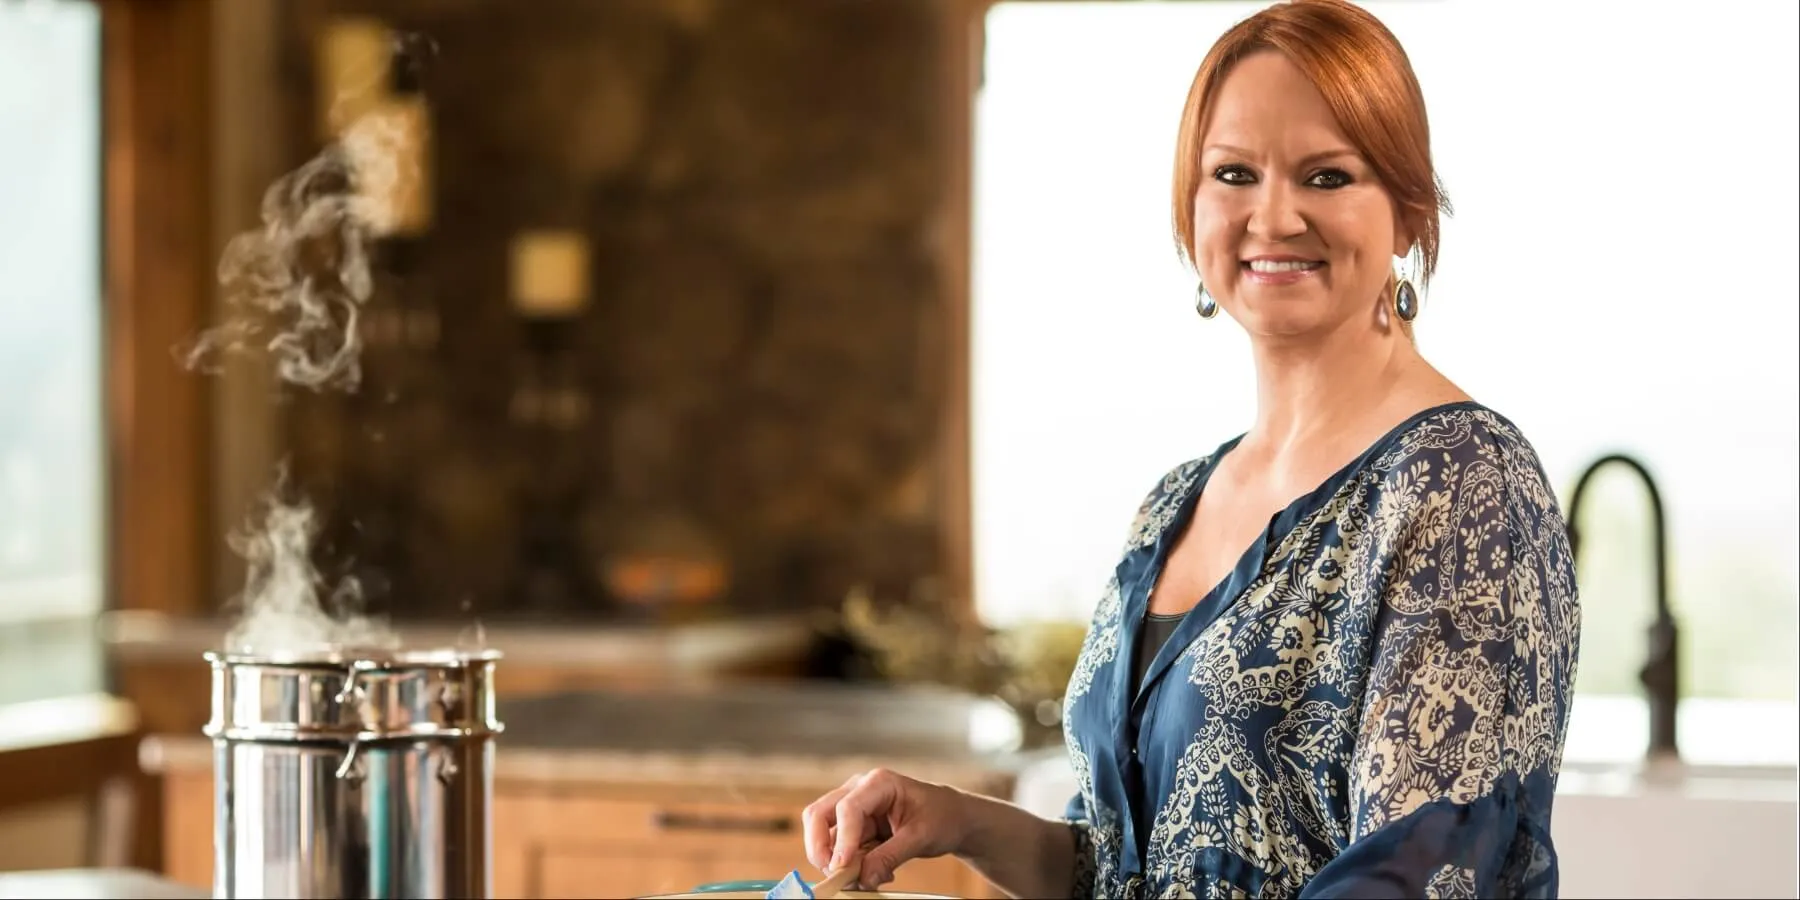 Ree Drummond is going to be a first-time grandma as daughter Alex announced her pregnancy